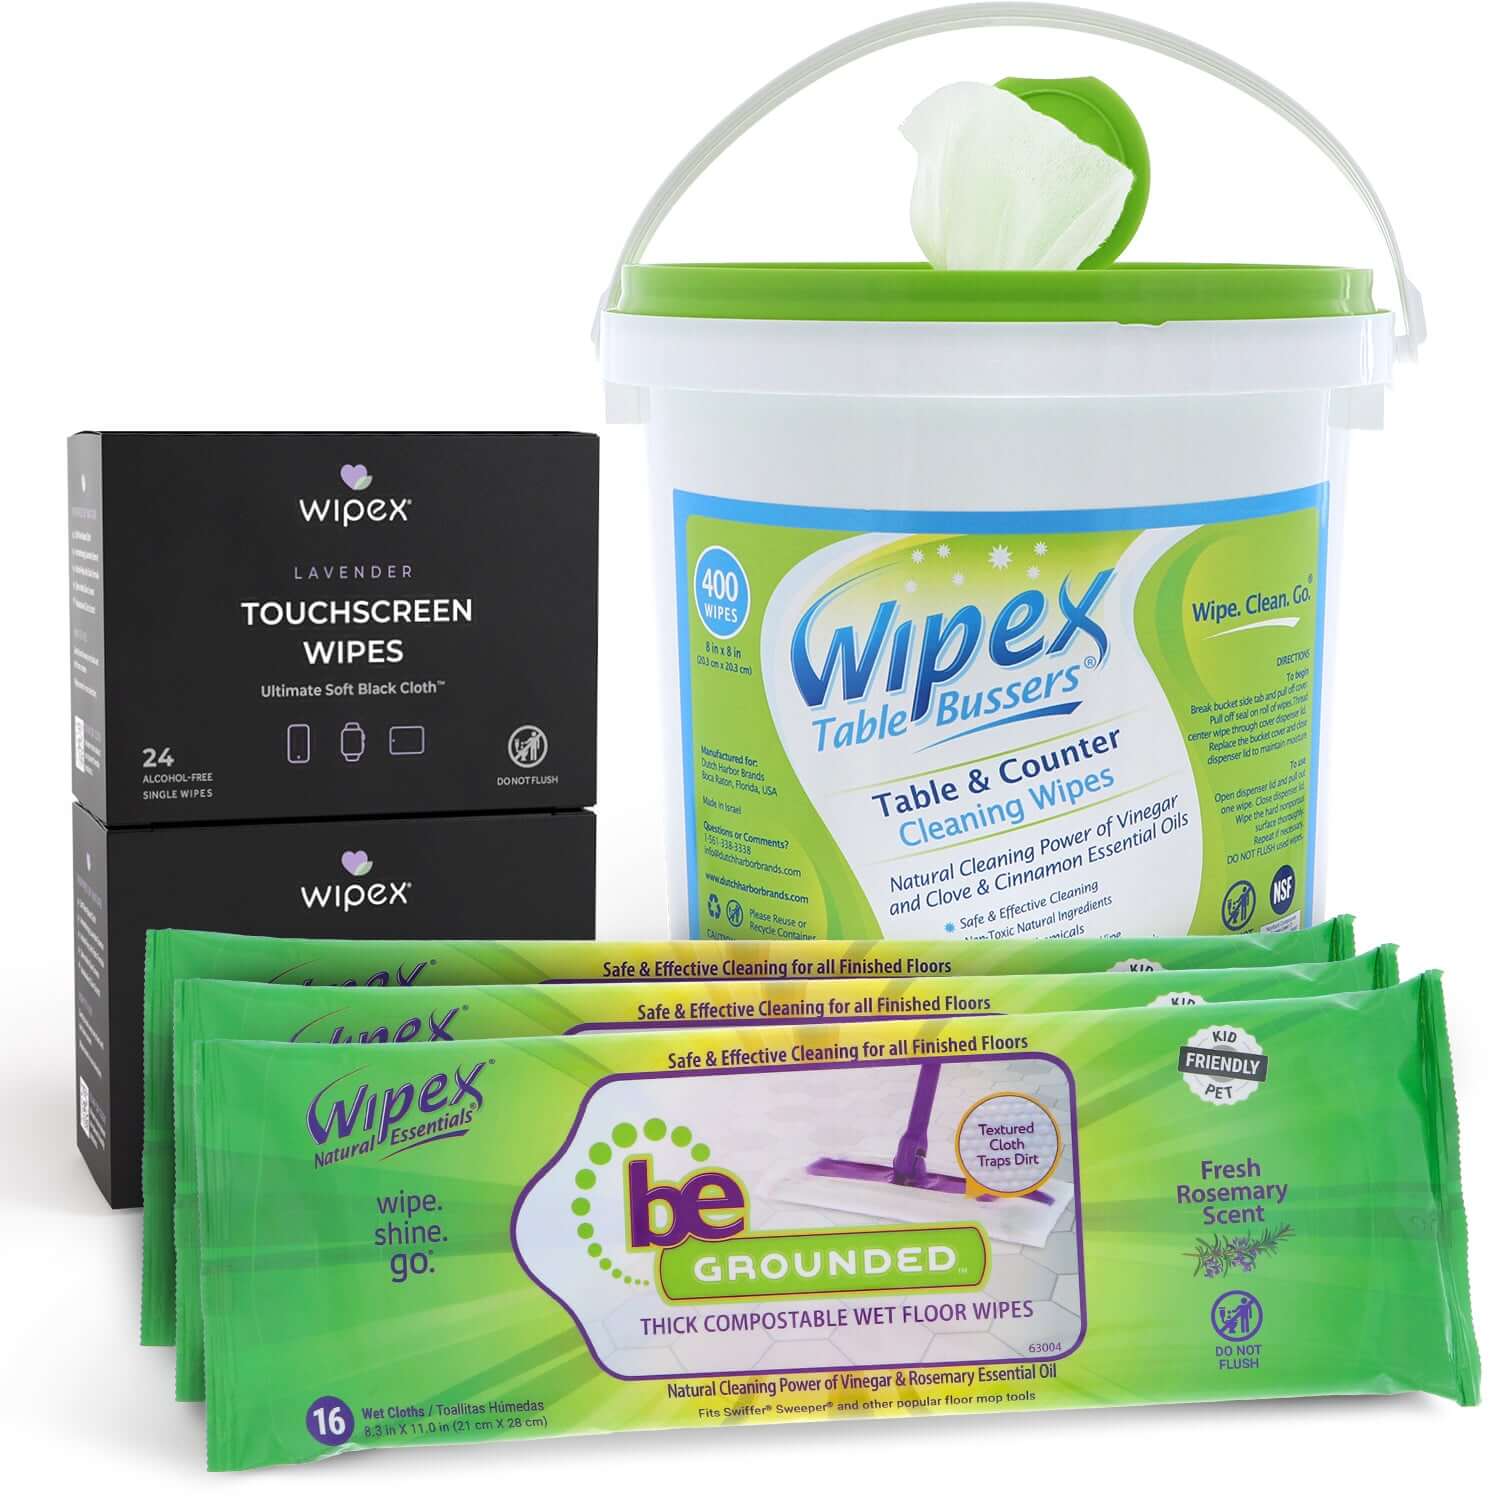 Plant-Based Home Cleaning Full Set | Wipes for Surfaces, Screens, & Floors